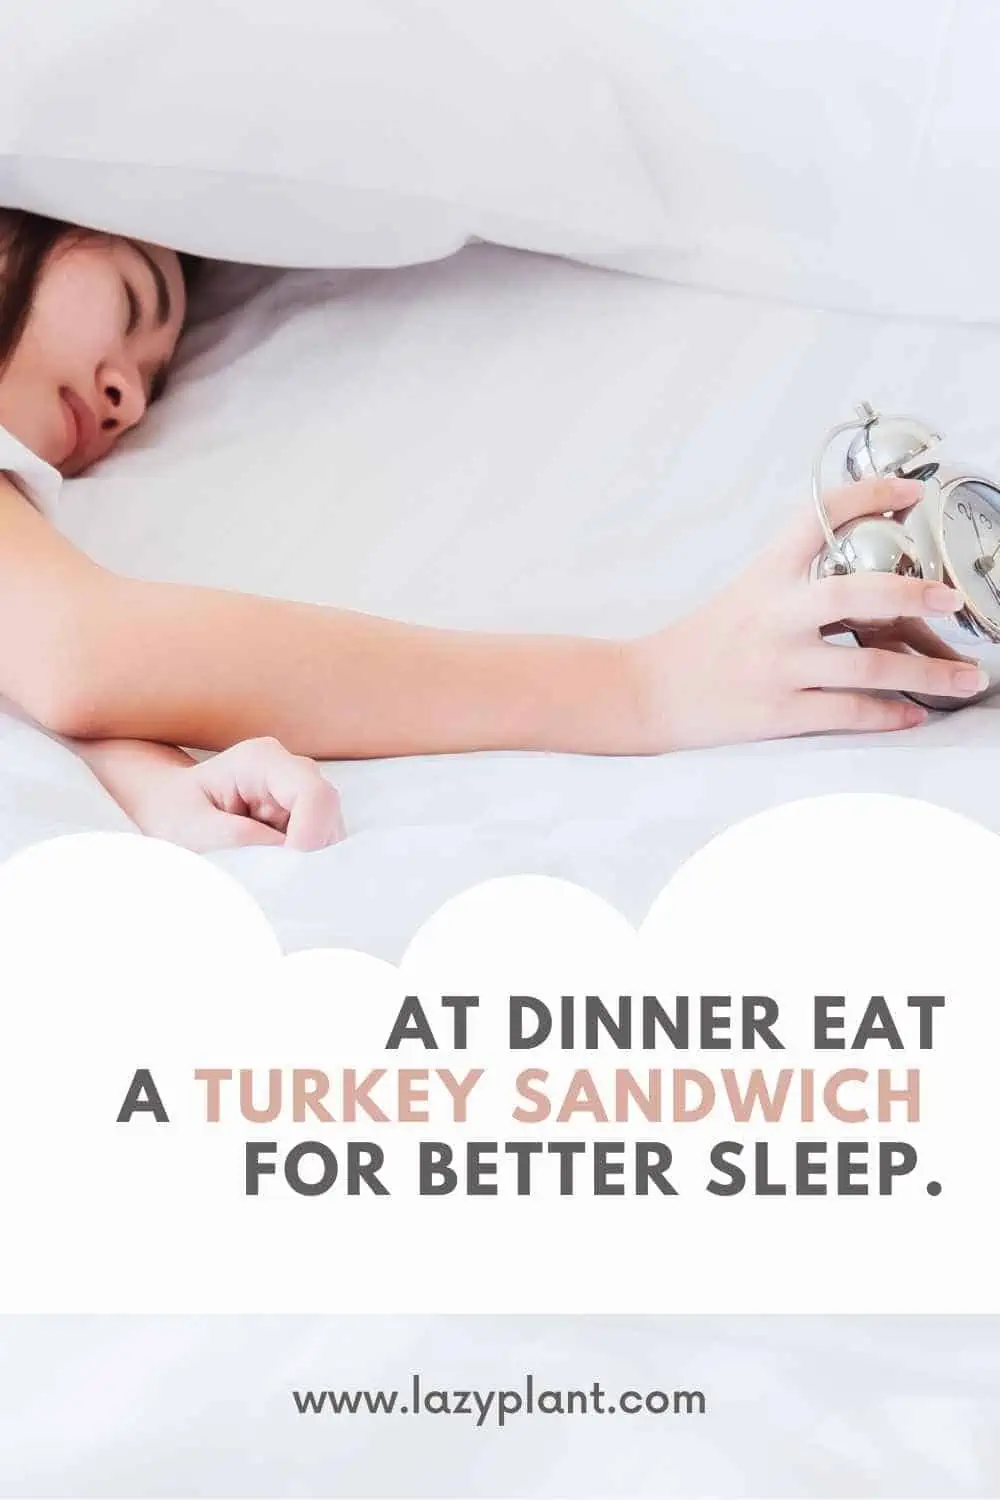 Eat a turkey sandwich before bed to sleep better at night.